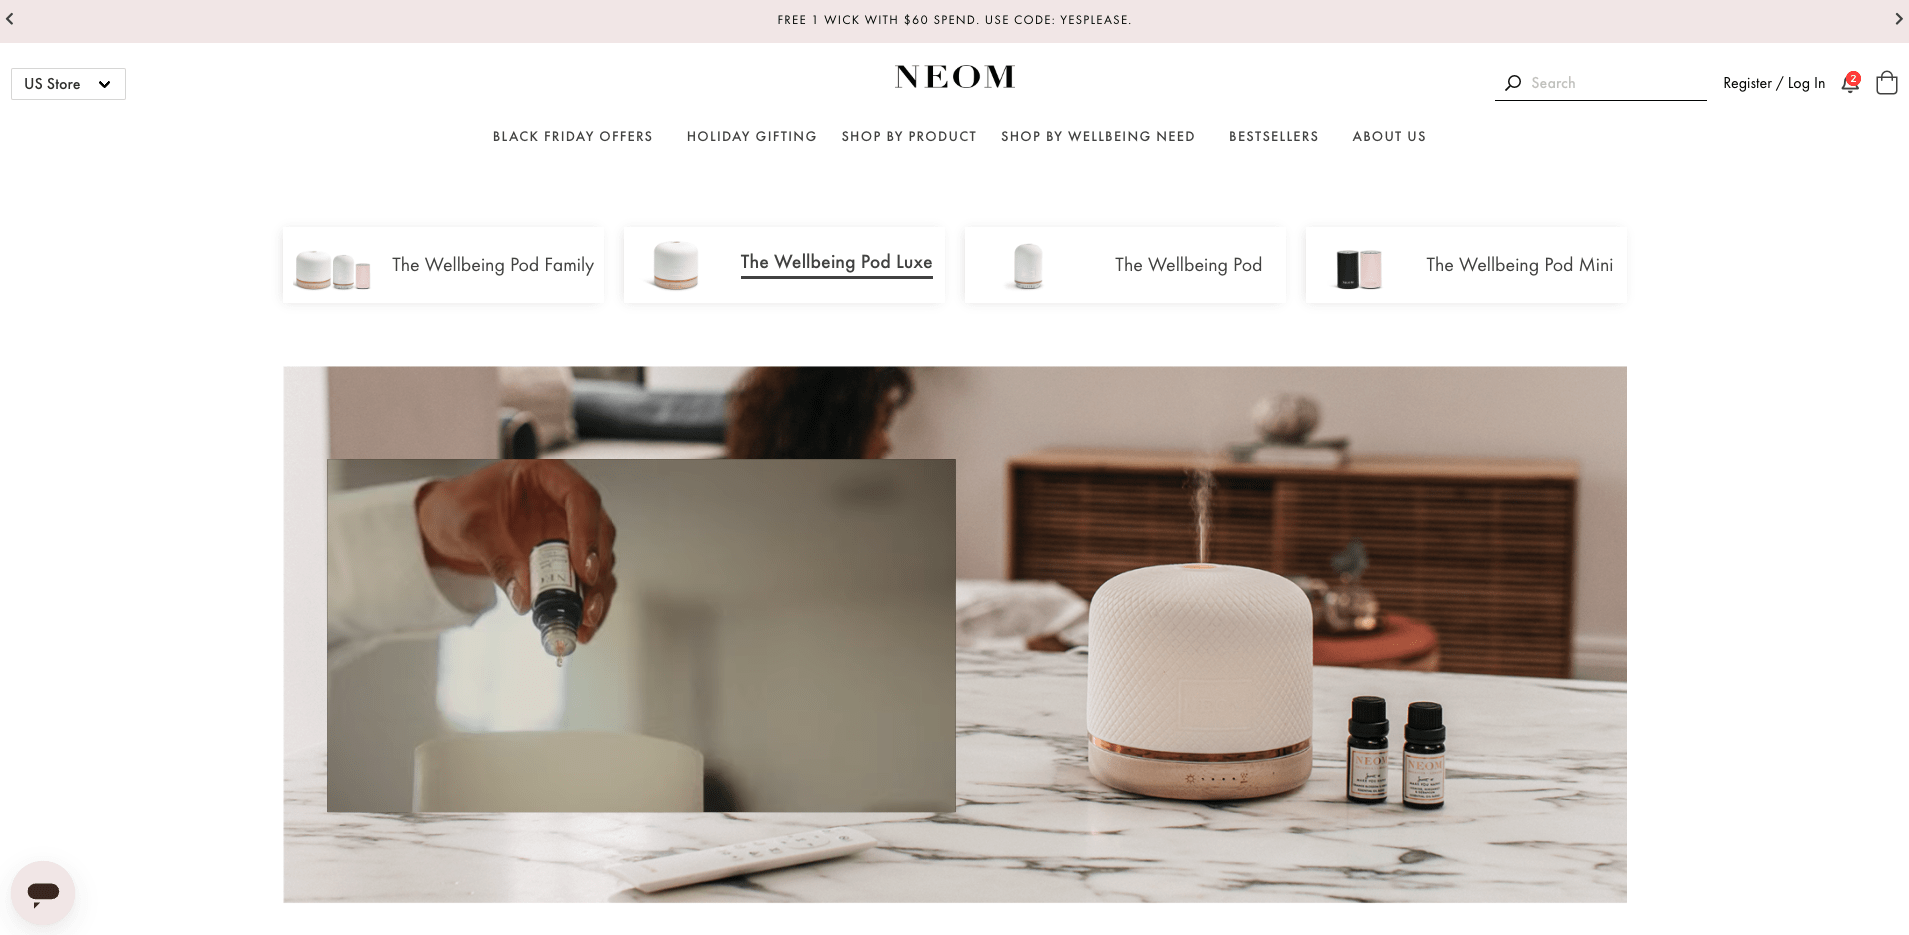 NEOM Wellbeing Pod holiday gift guide